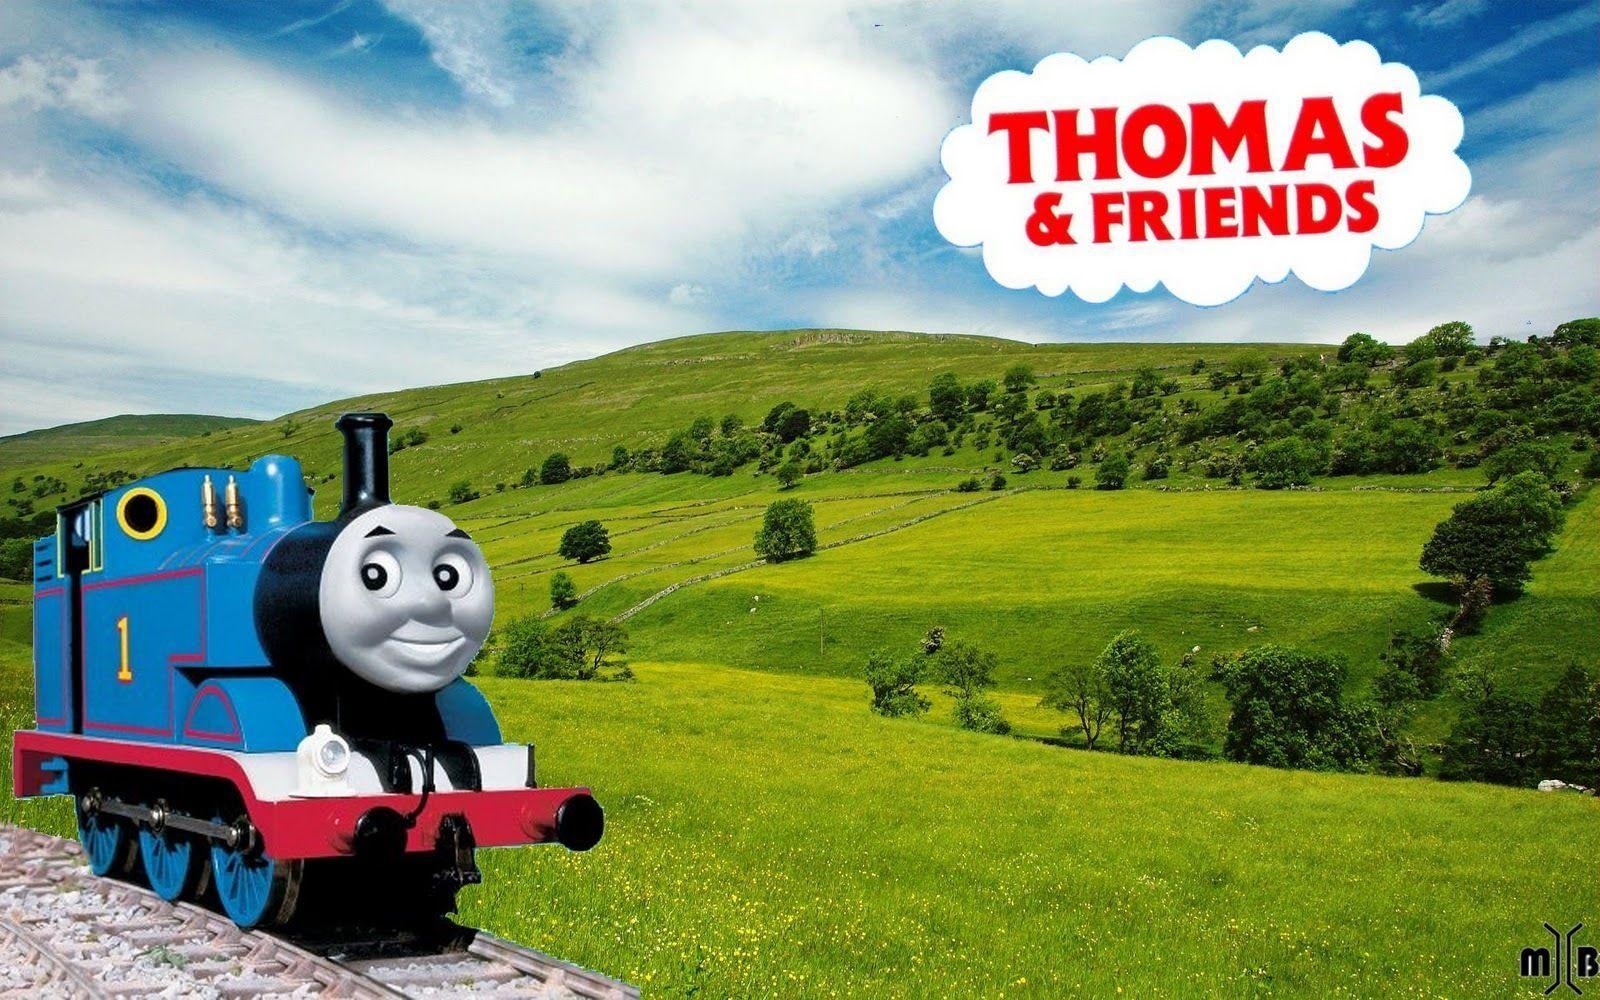 Thomas And Friends Wallpaper And Friends Wallpaper